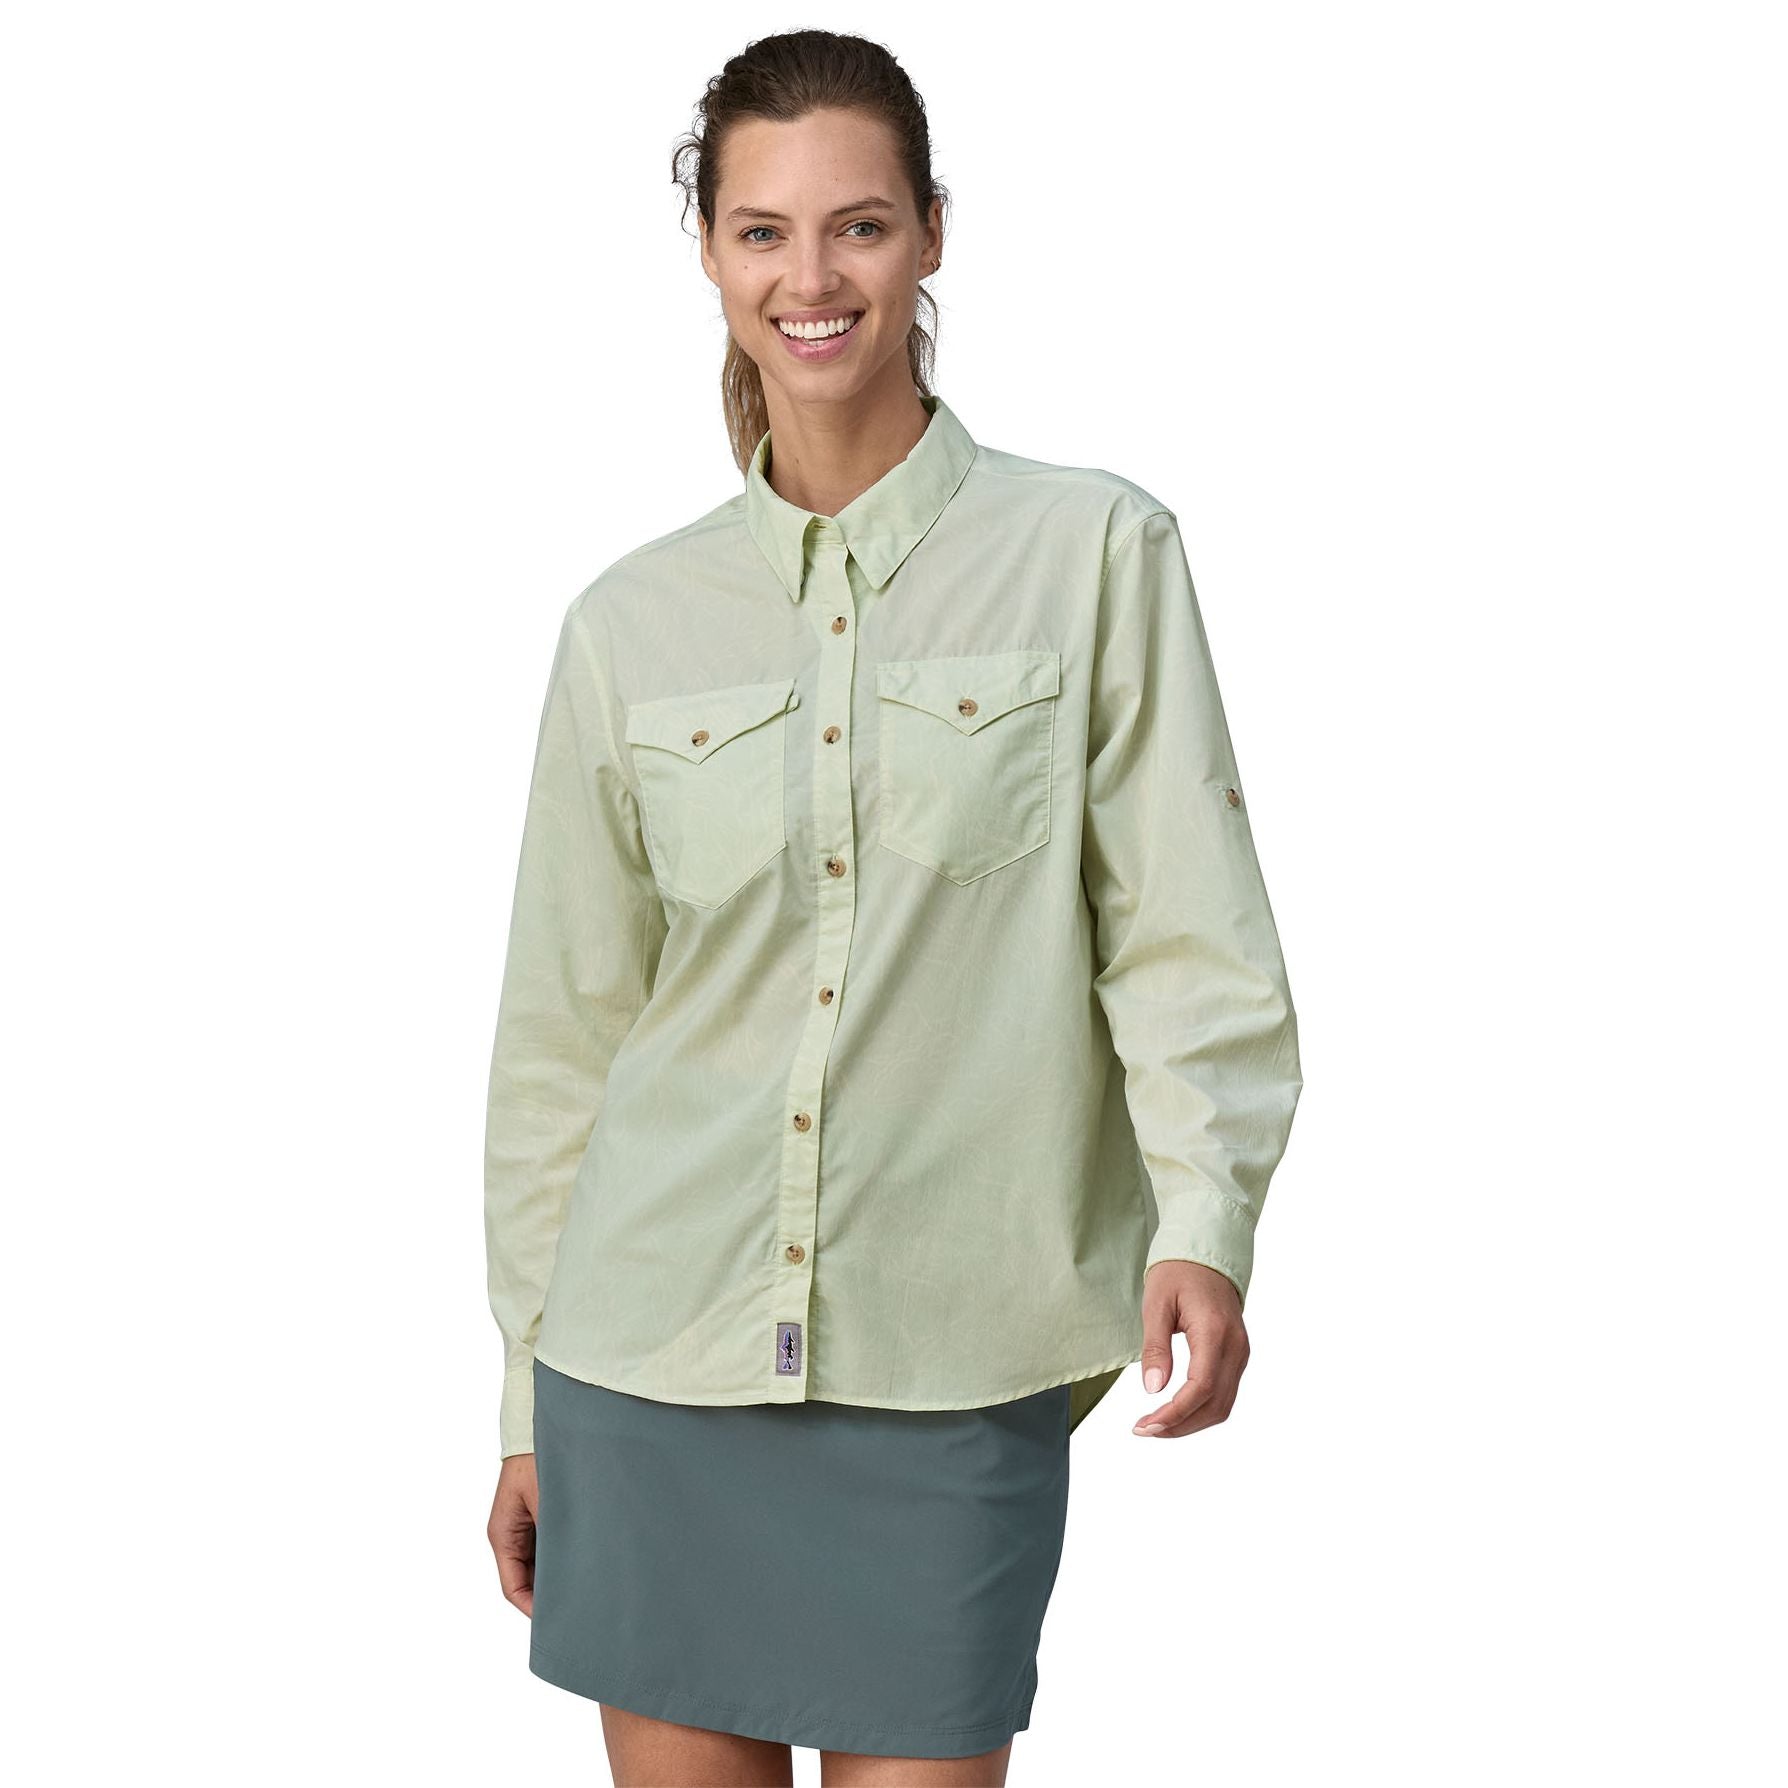 Patagonia Women's Sun Stretch Shirt LS Over Under Water: Wispy Green Image 03